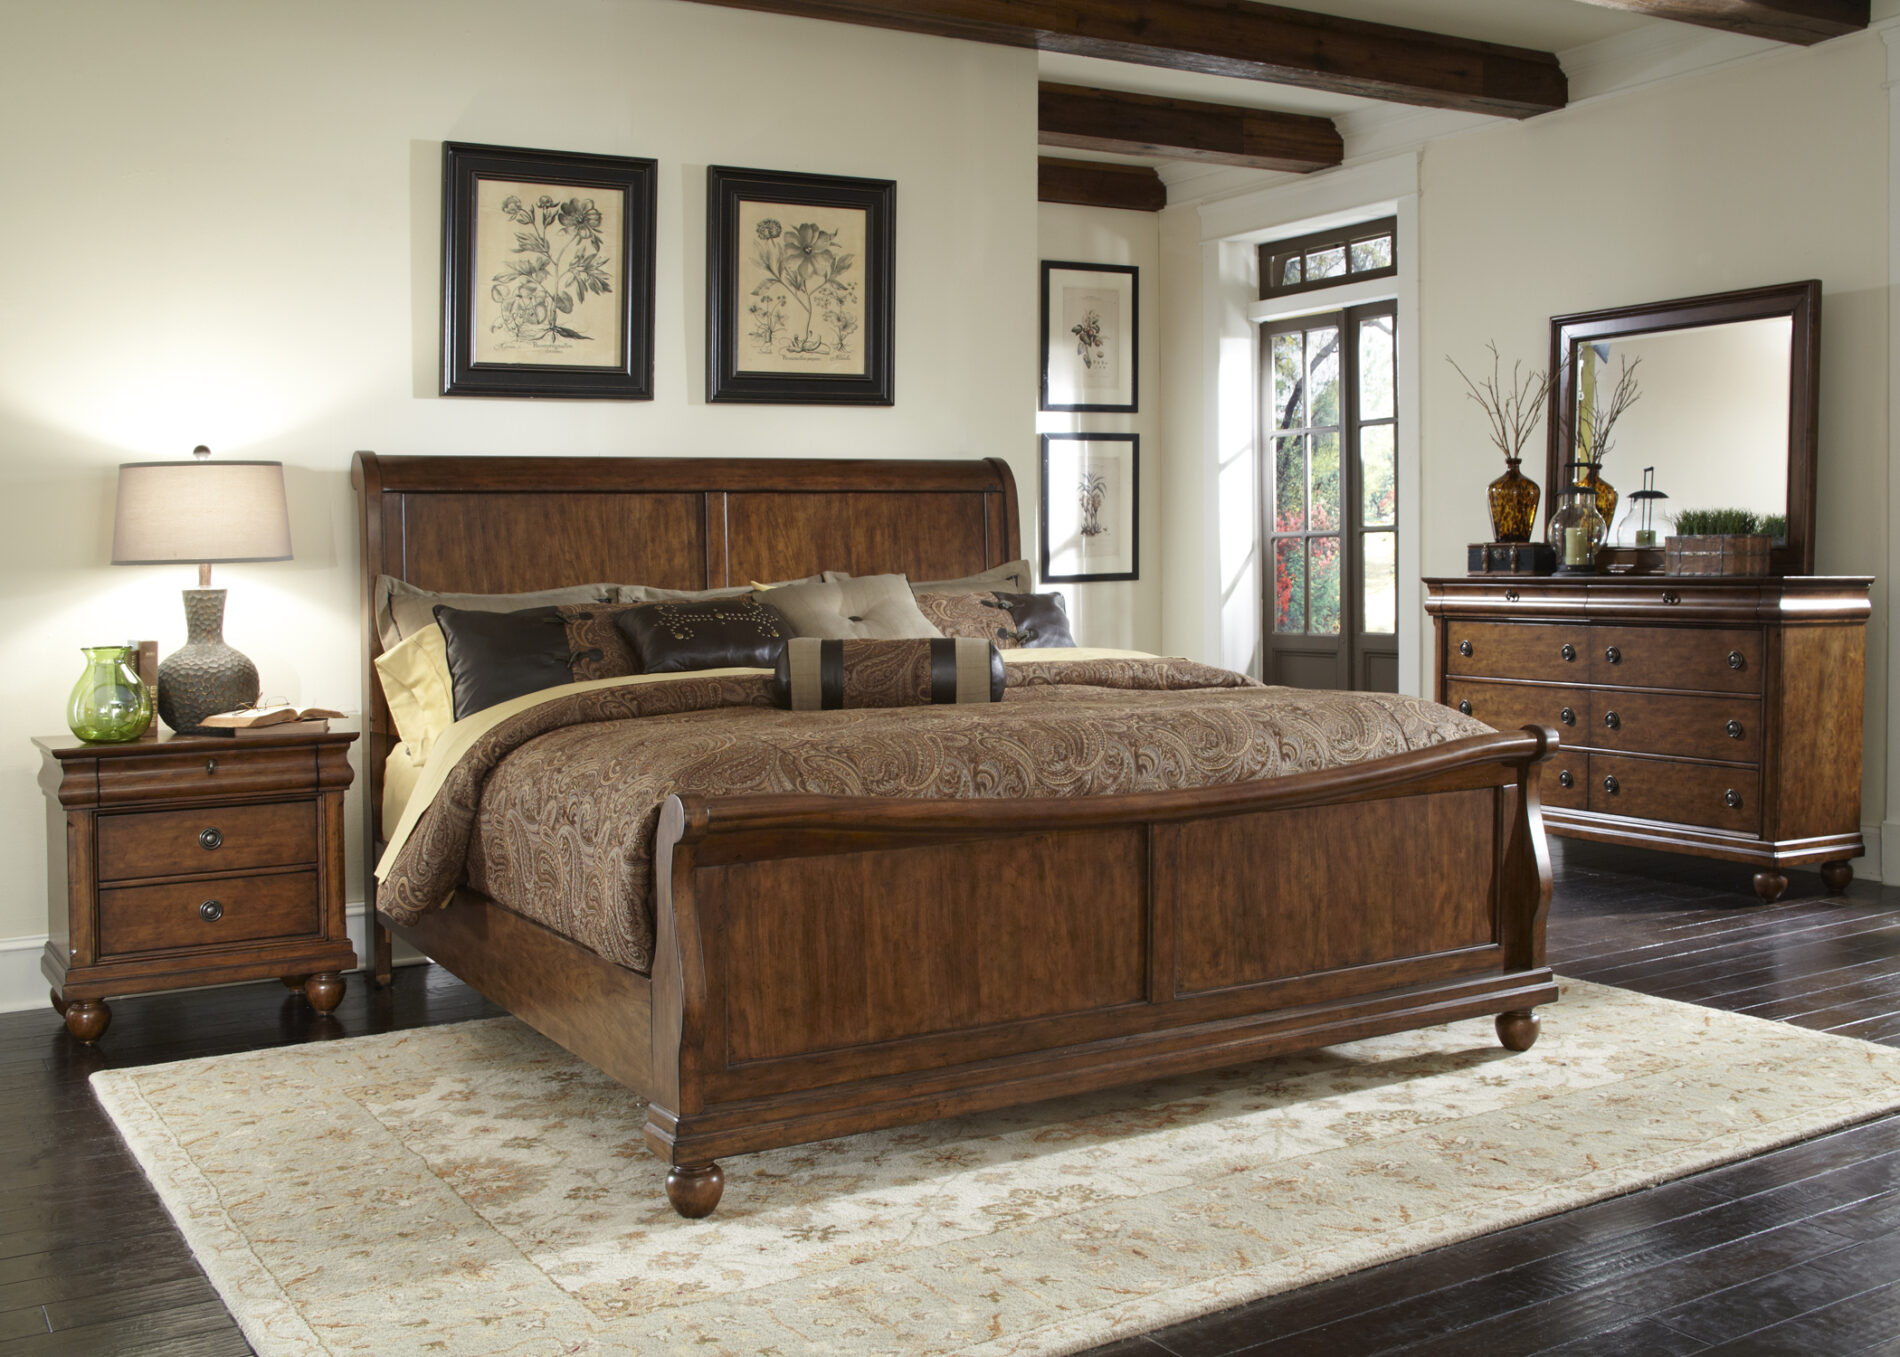 liberty bedroom furniture collections